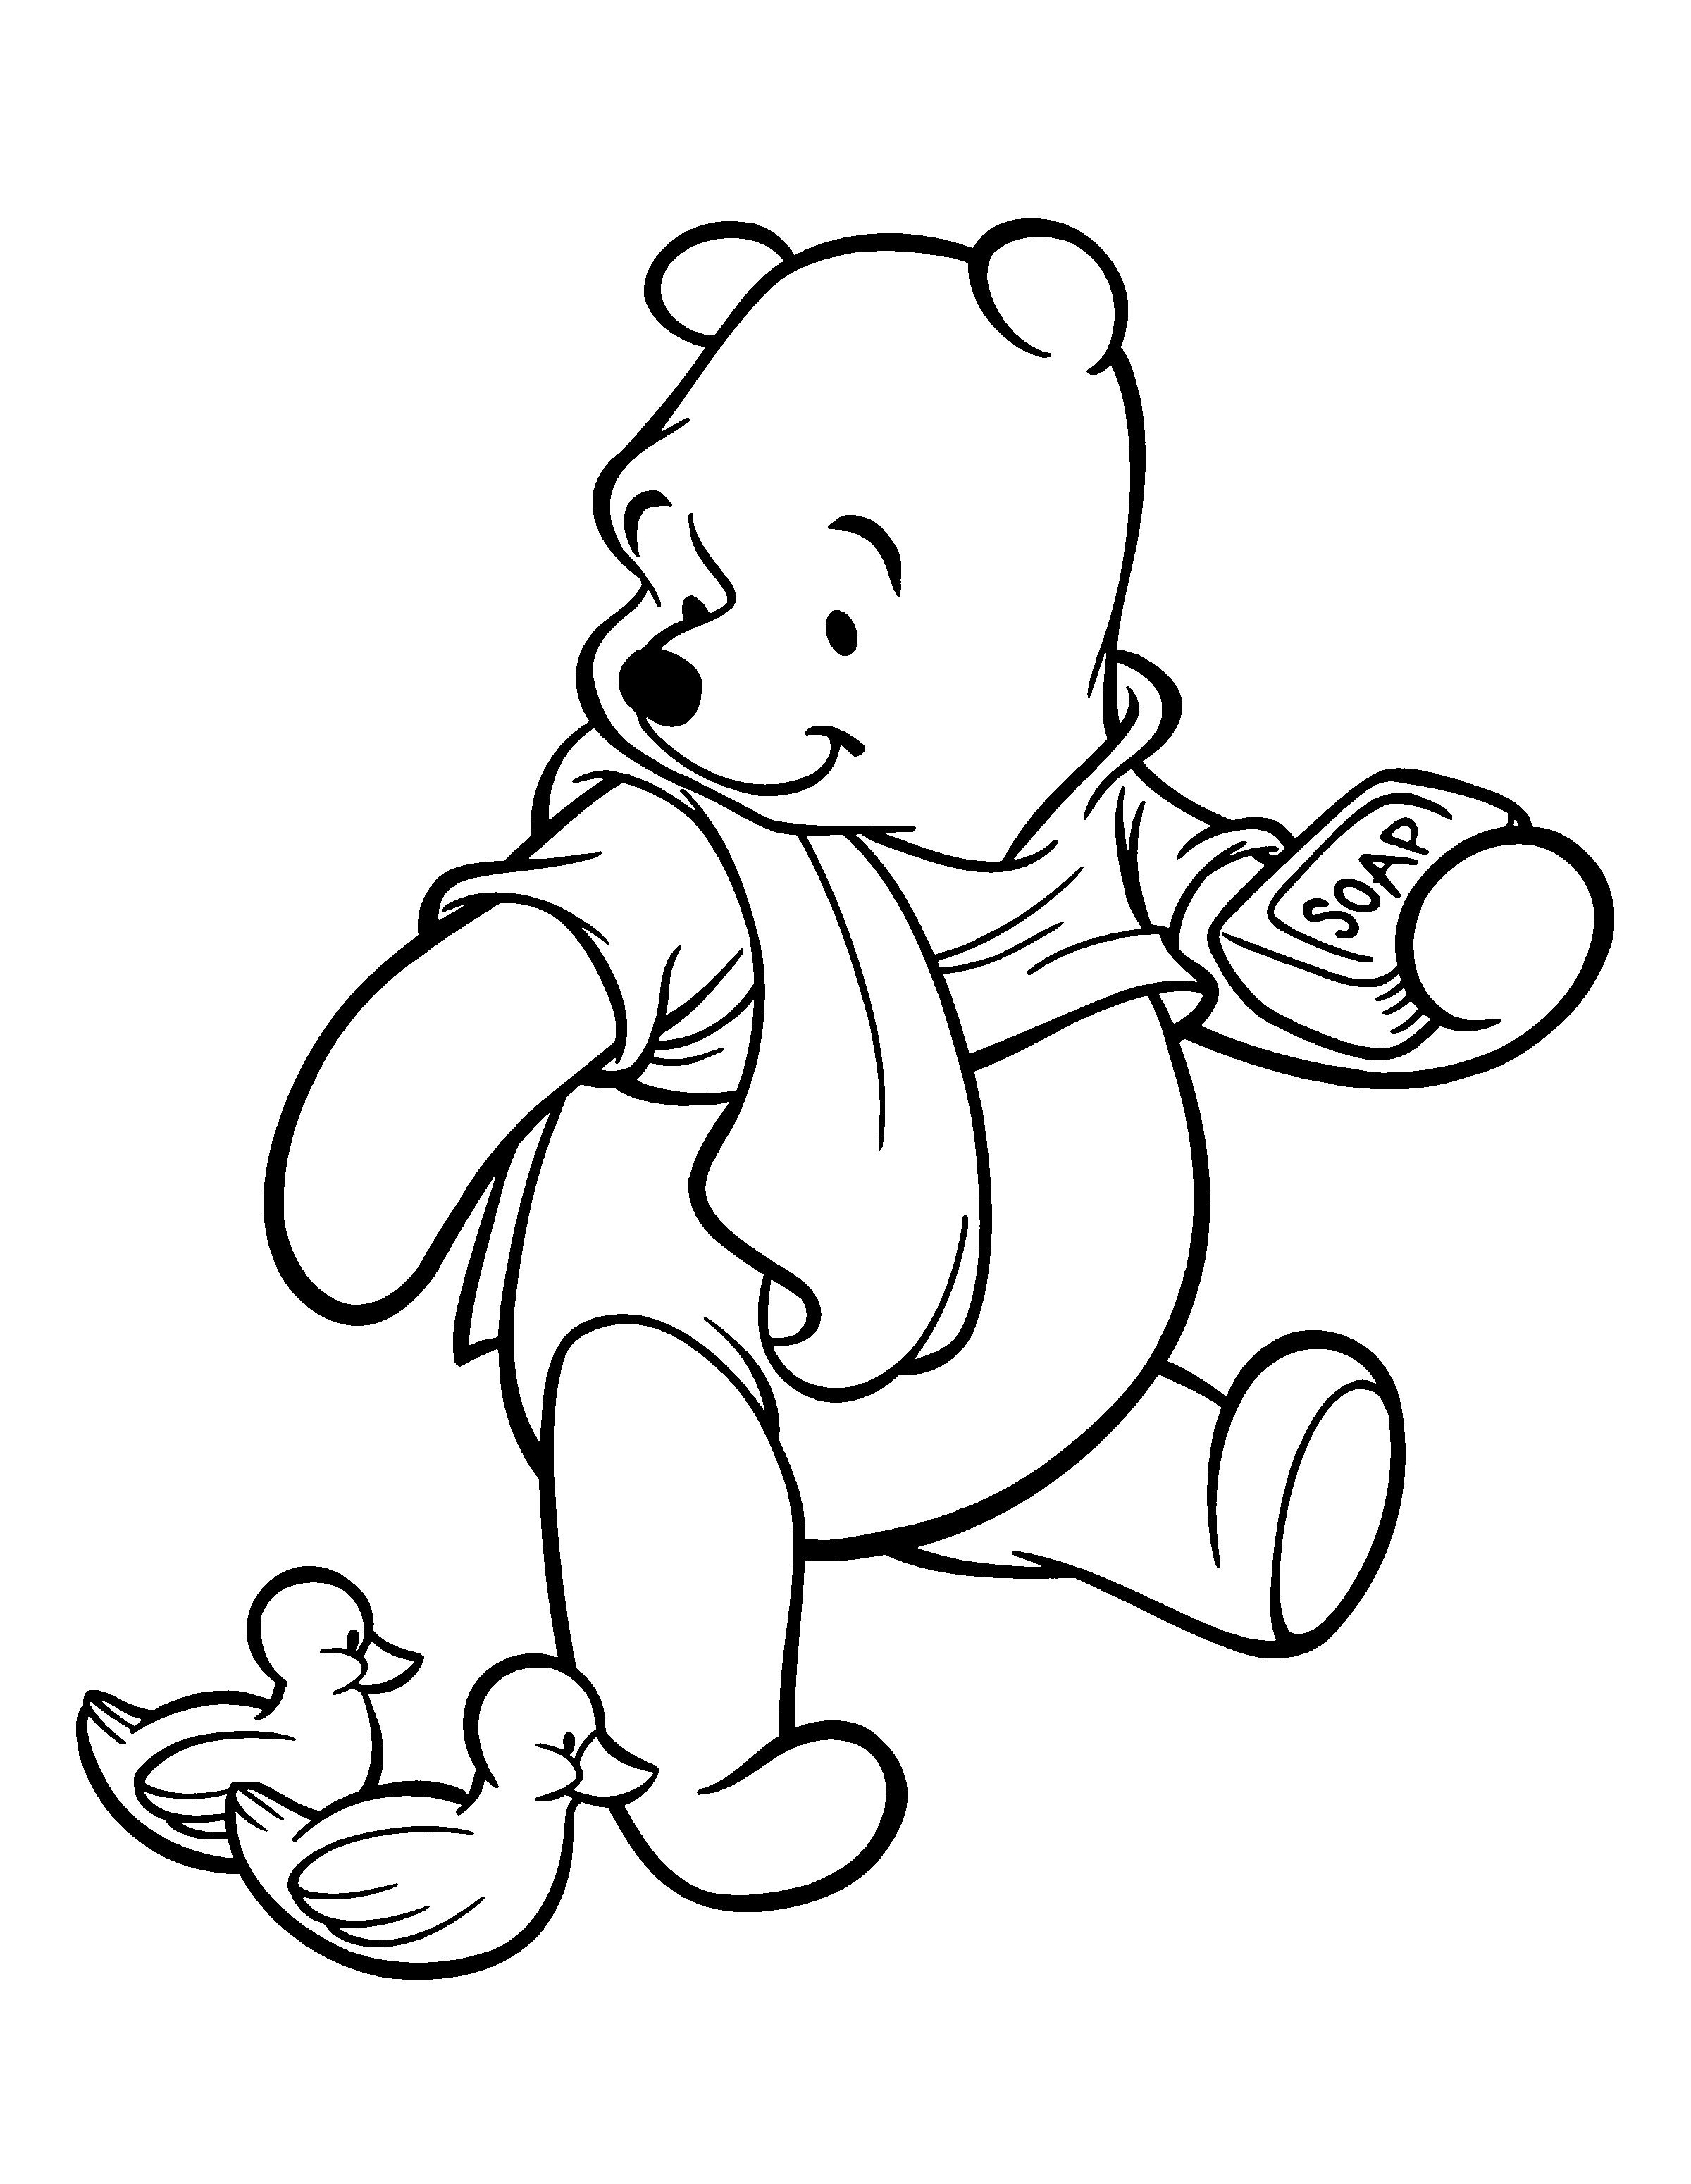 Winnie the Pooh: Adult Colouring Book (Disney)